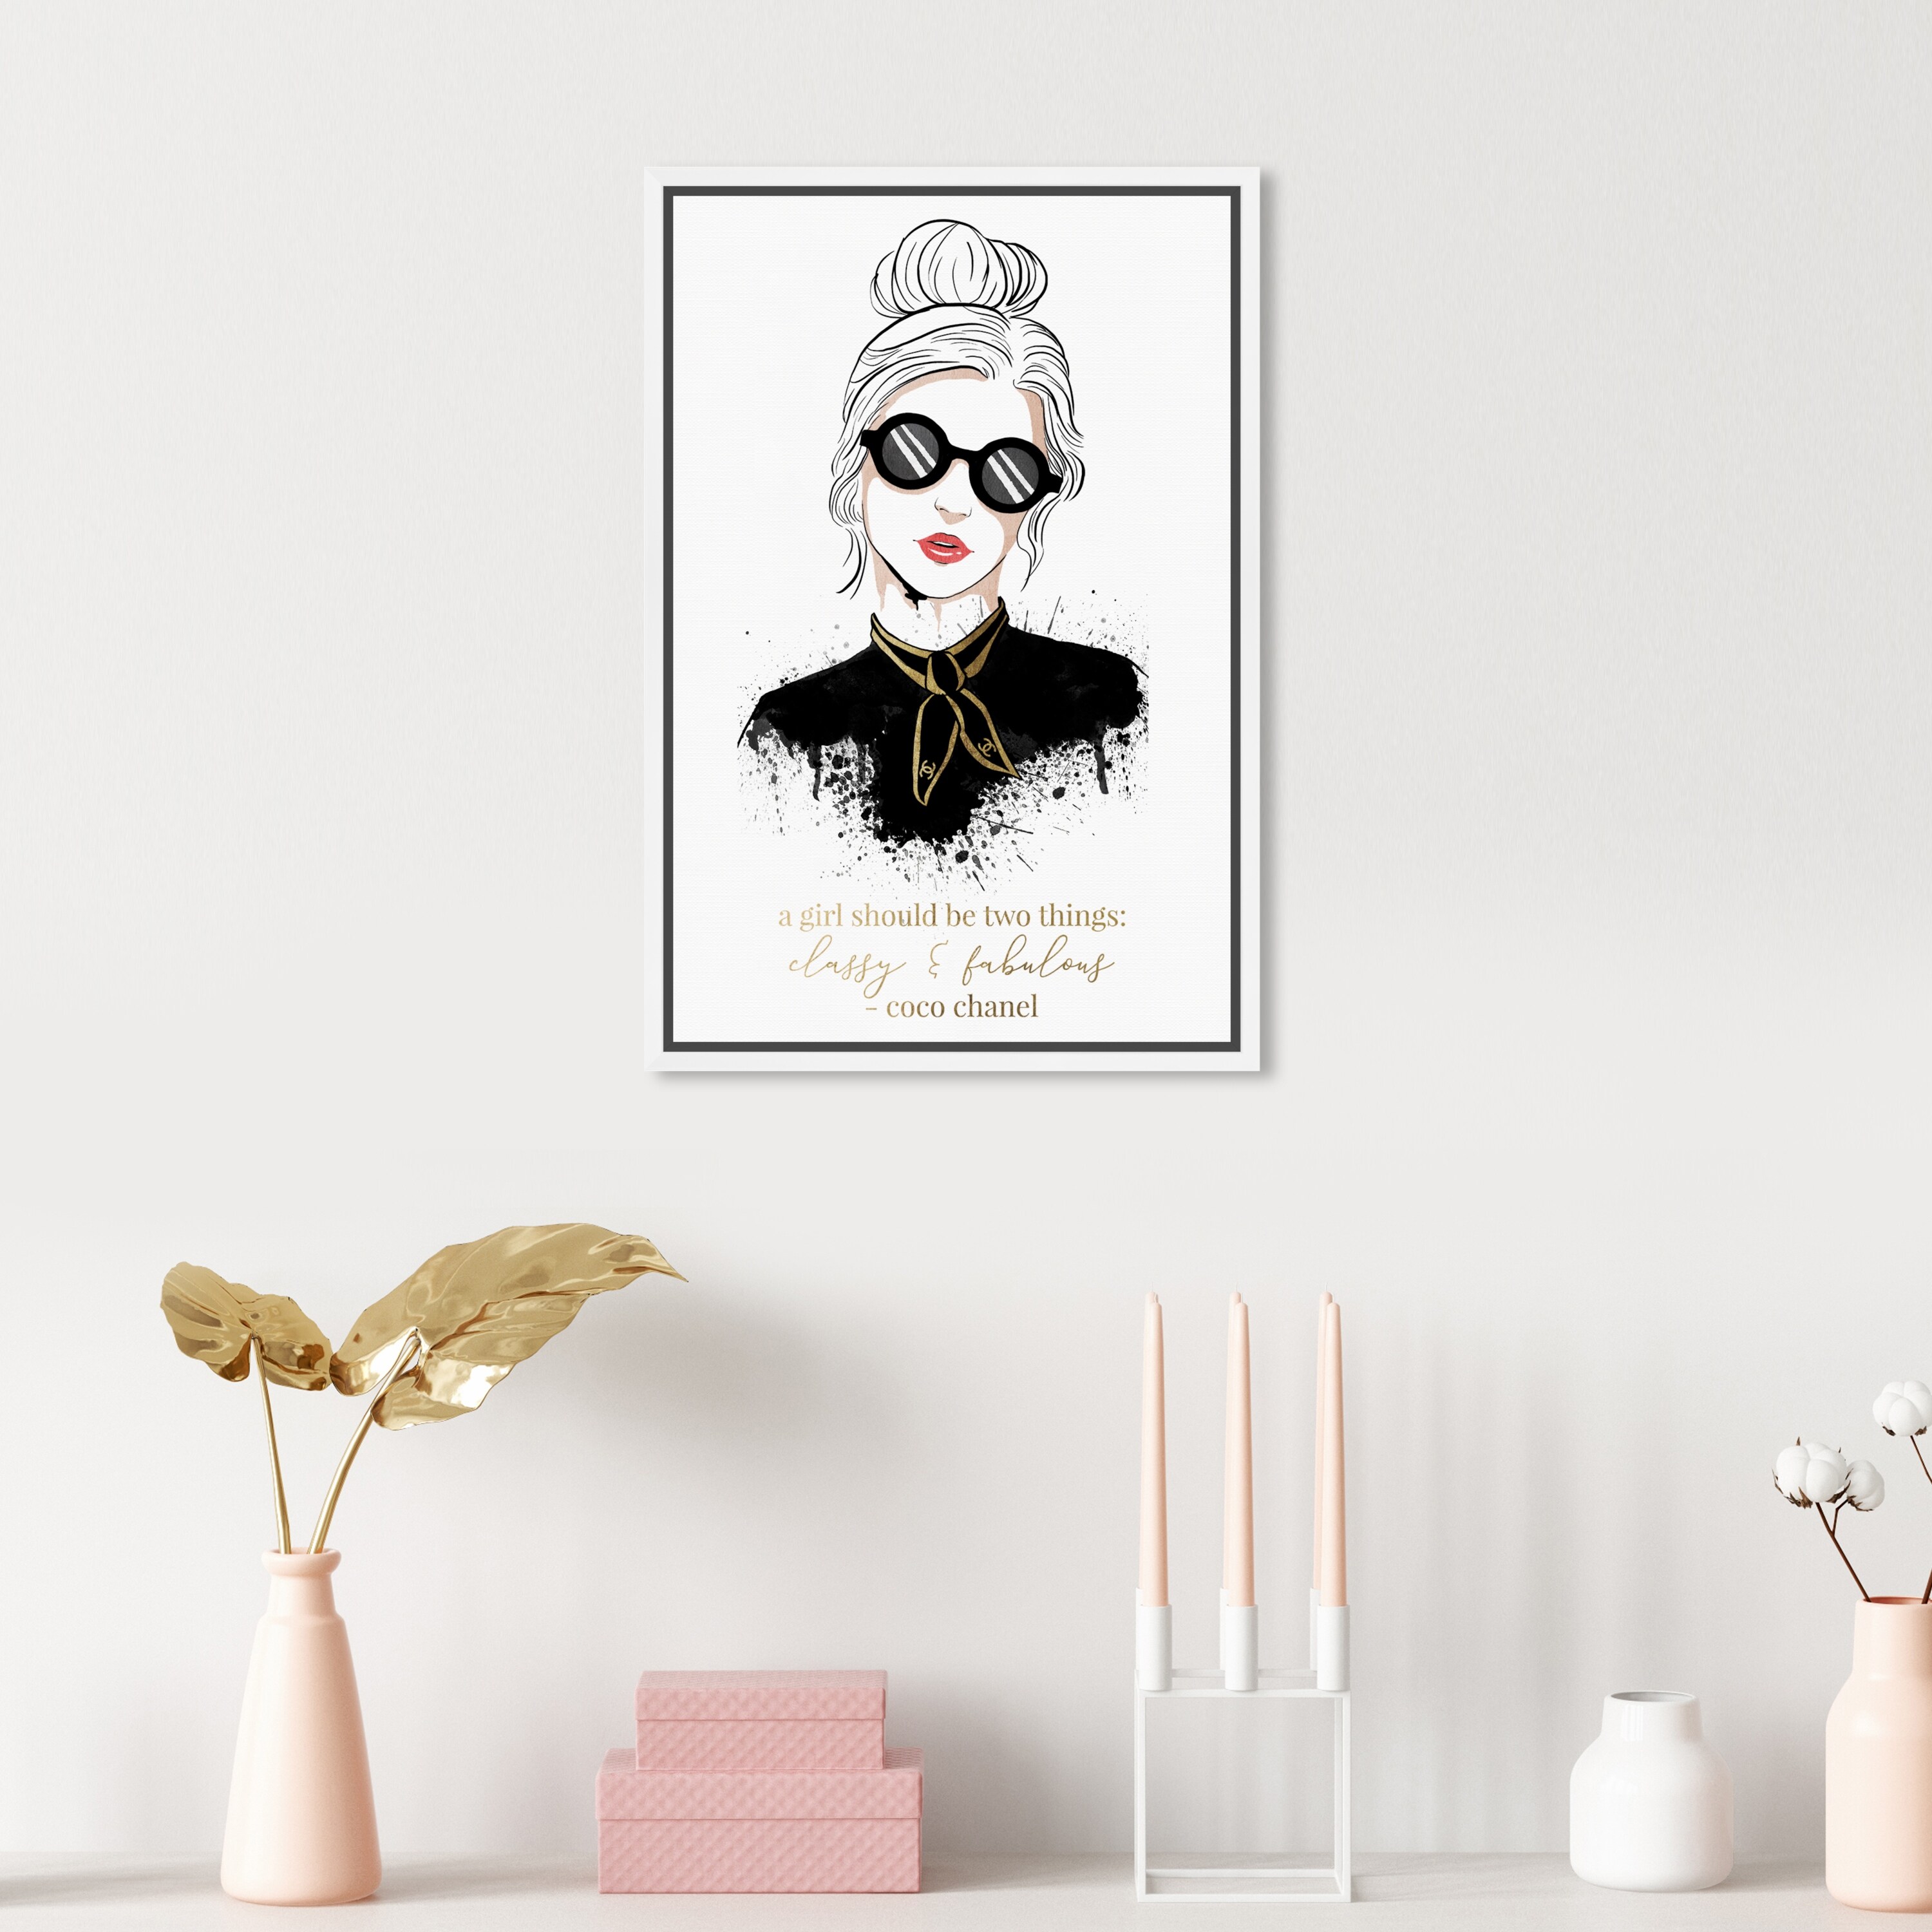 Smile Art Design A Girl Should Be Two Things Classy and Fabulous Quote  Canvas Print Motivational Inspirational Home Decor Artwork Bedroom Living  Room Ready to Hang Made in the USA - 36x24 